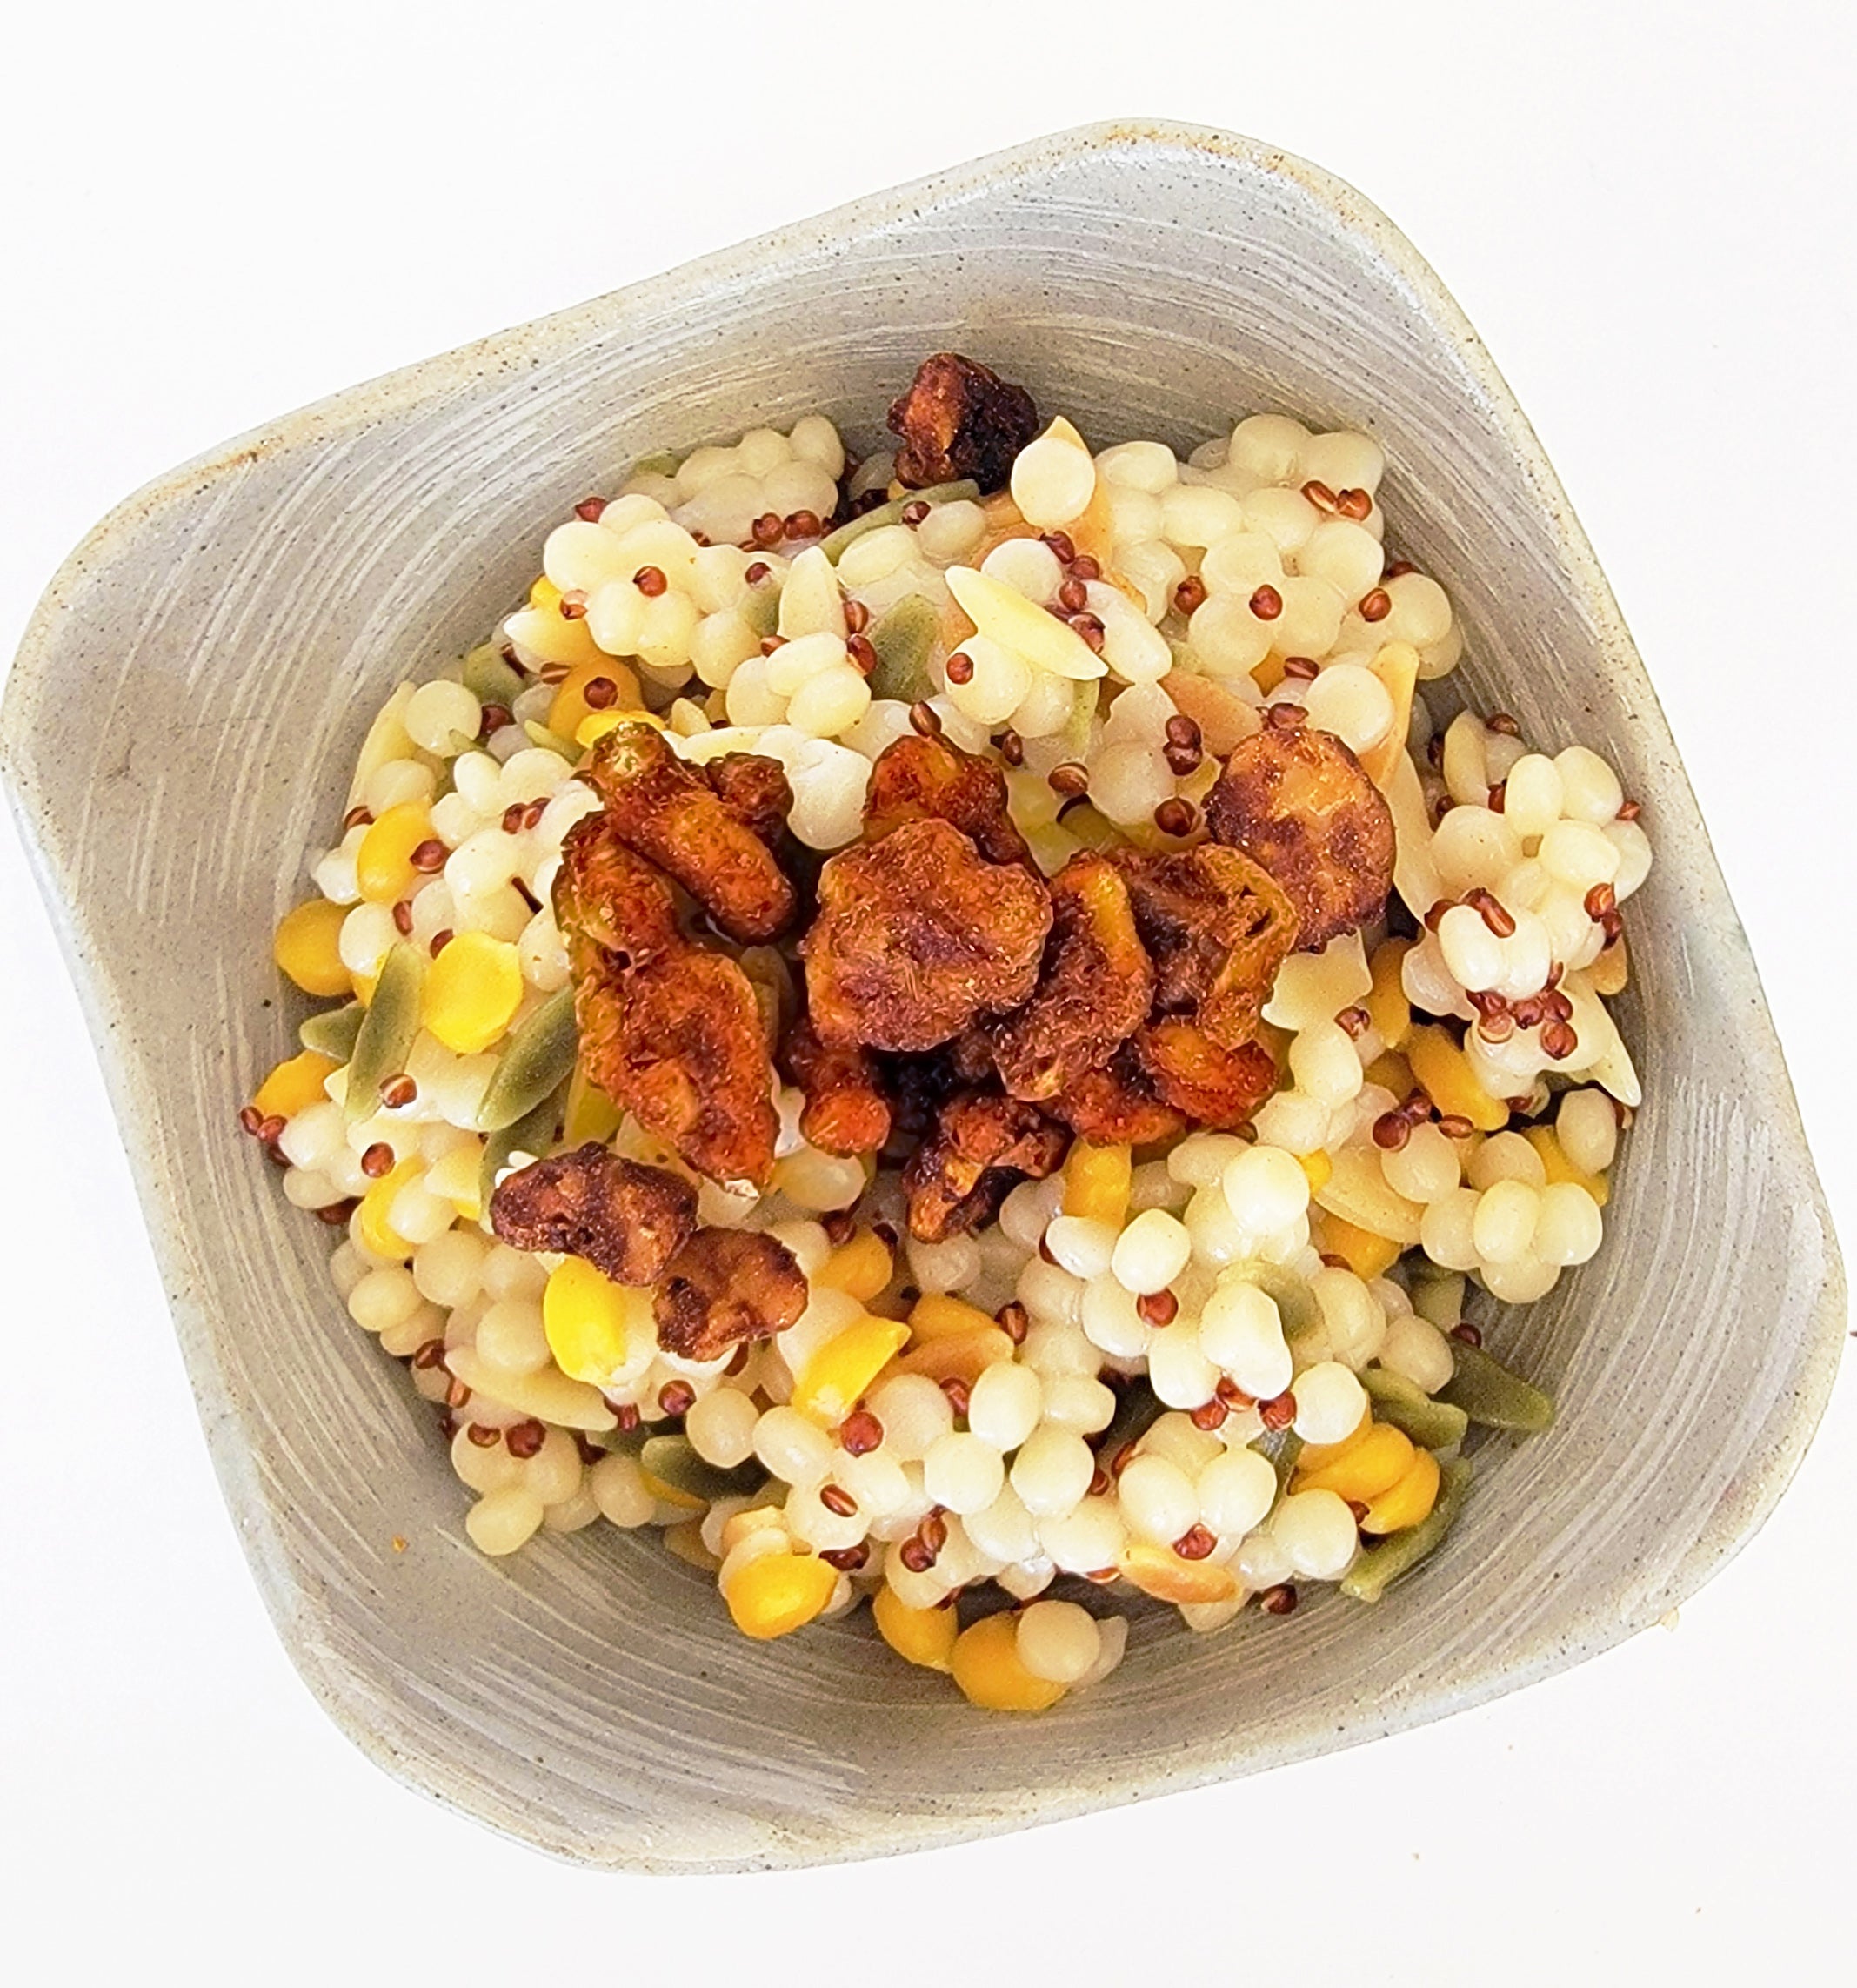 Sweet & spicy walnut snacks being used as a topping on a grain bowl